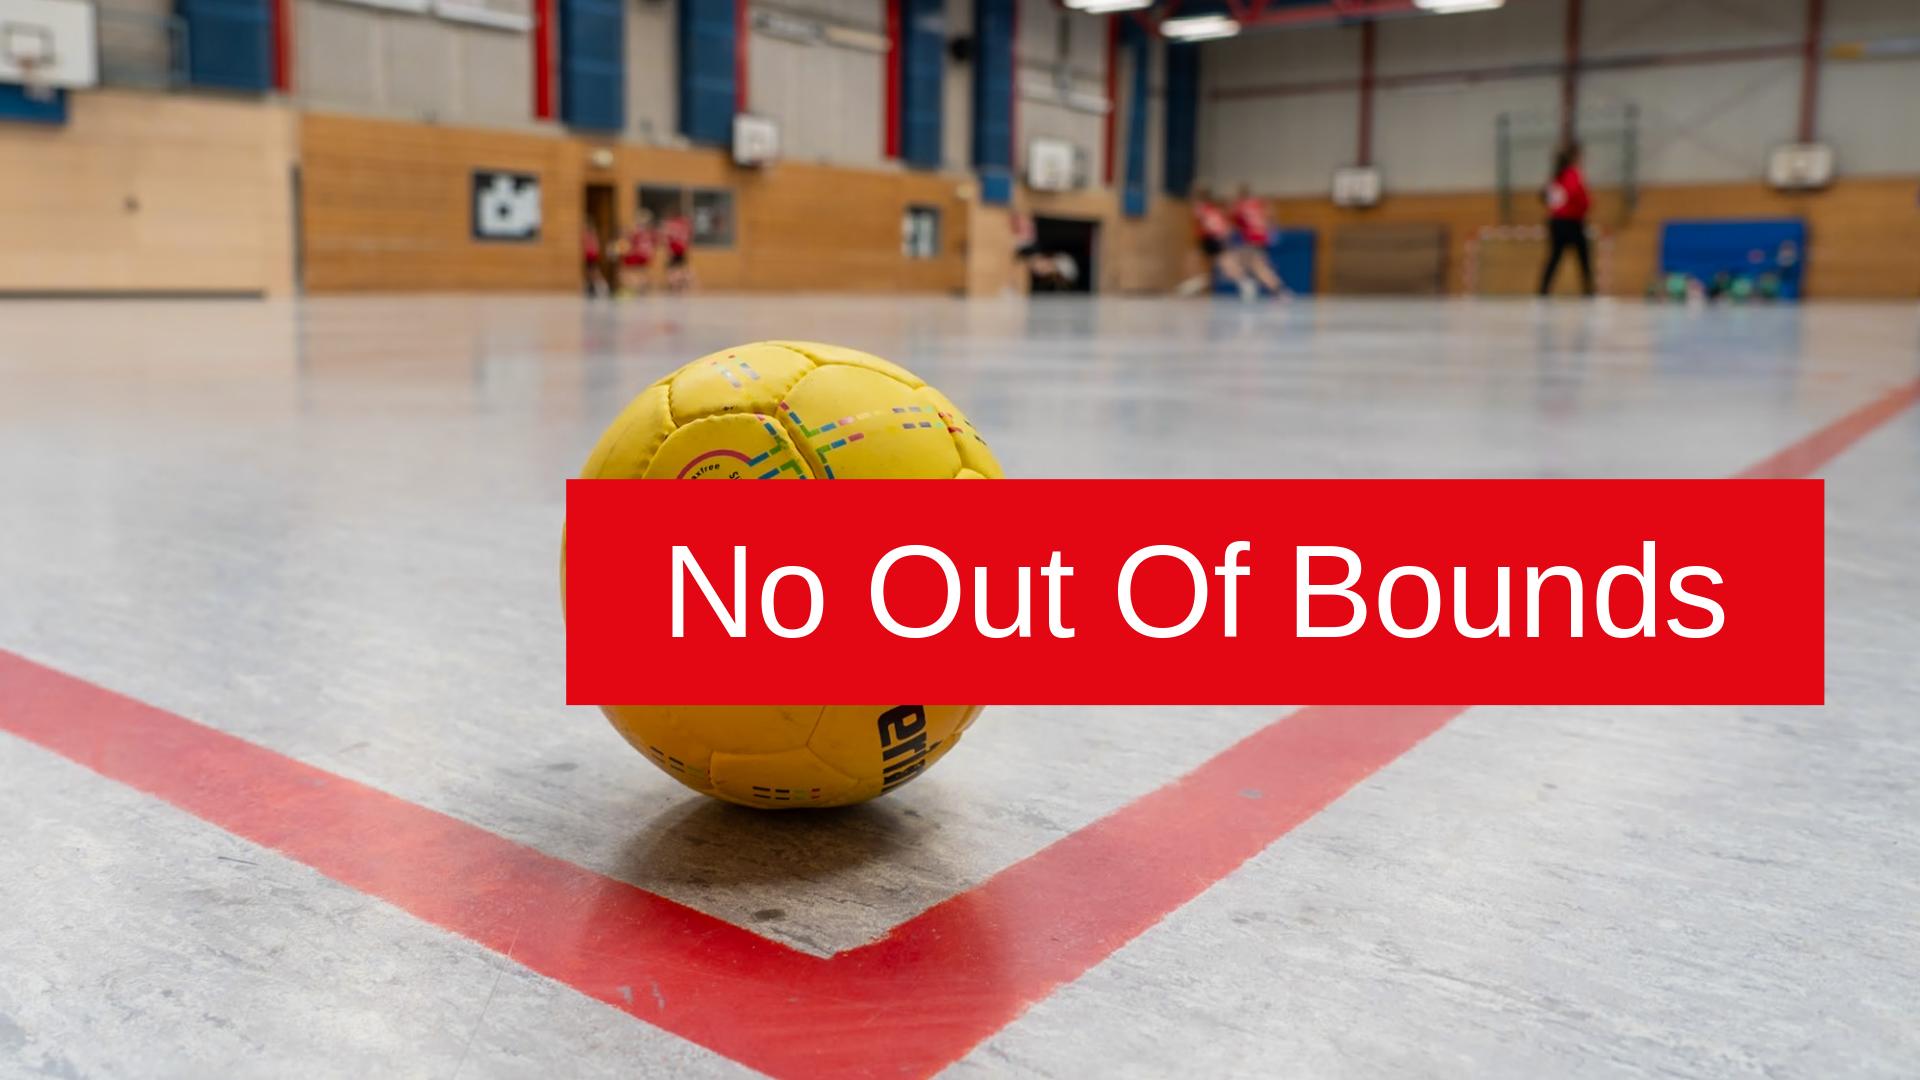 Not Out Of Bounds